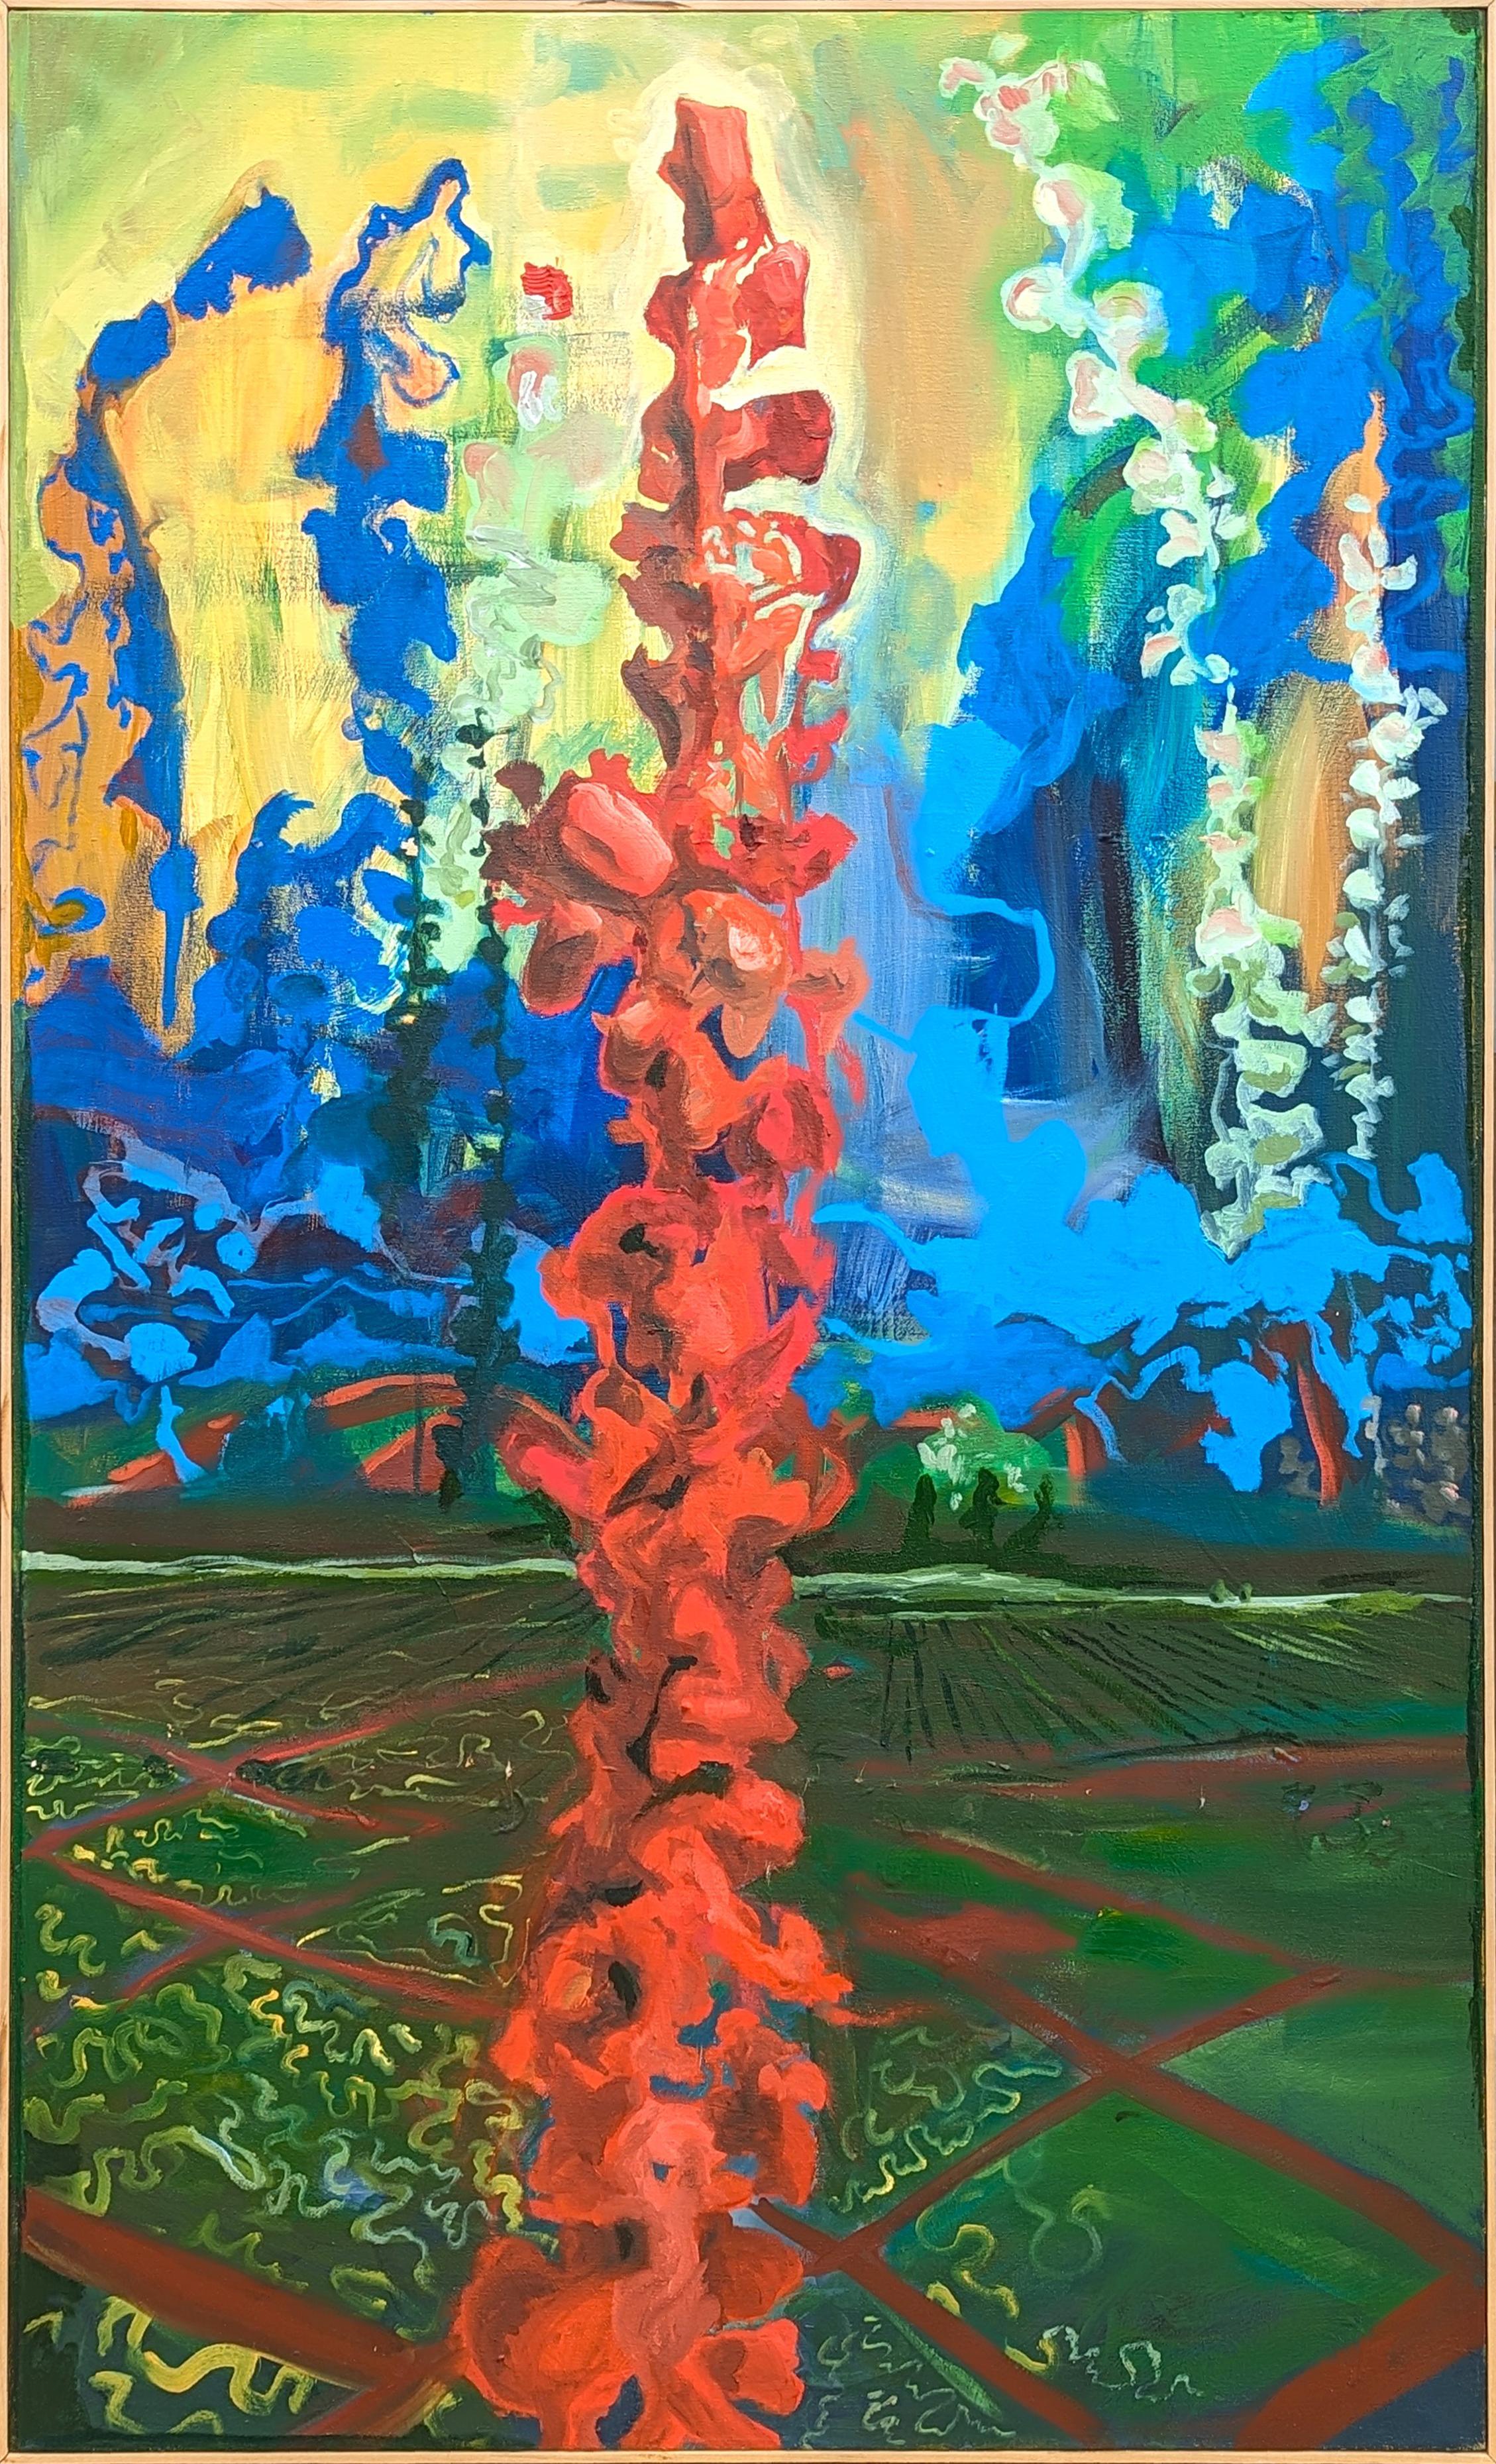 Unknown Abstract Painting - Colorful Modern Red, Blue, and Green Toned Gladiola Inspired Abstract Landscape